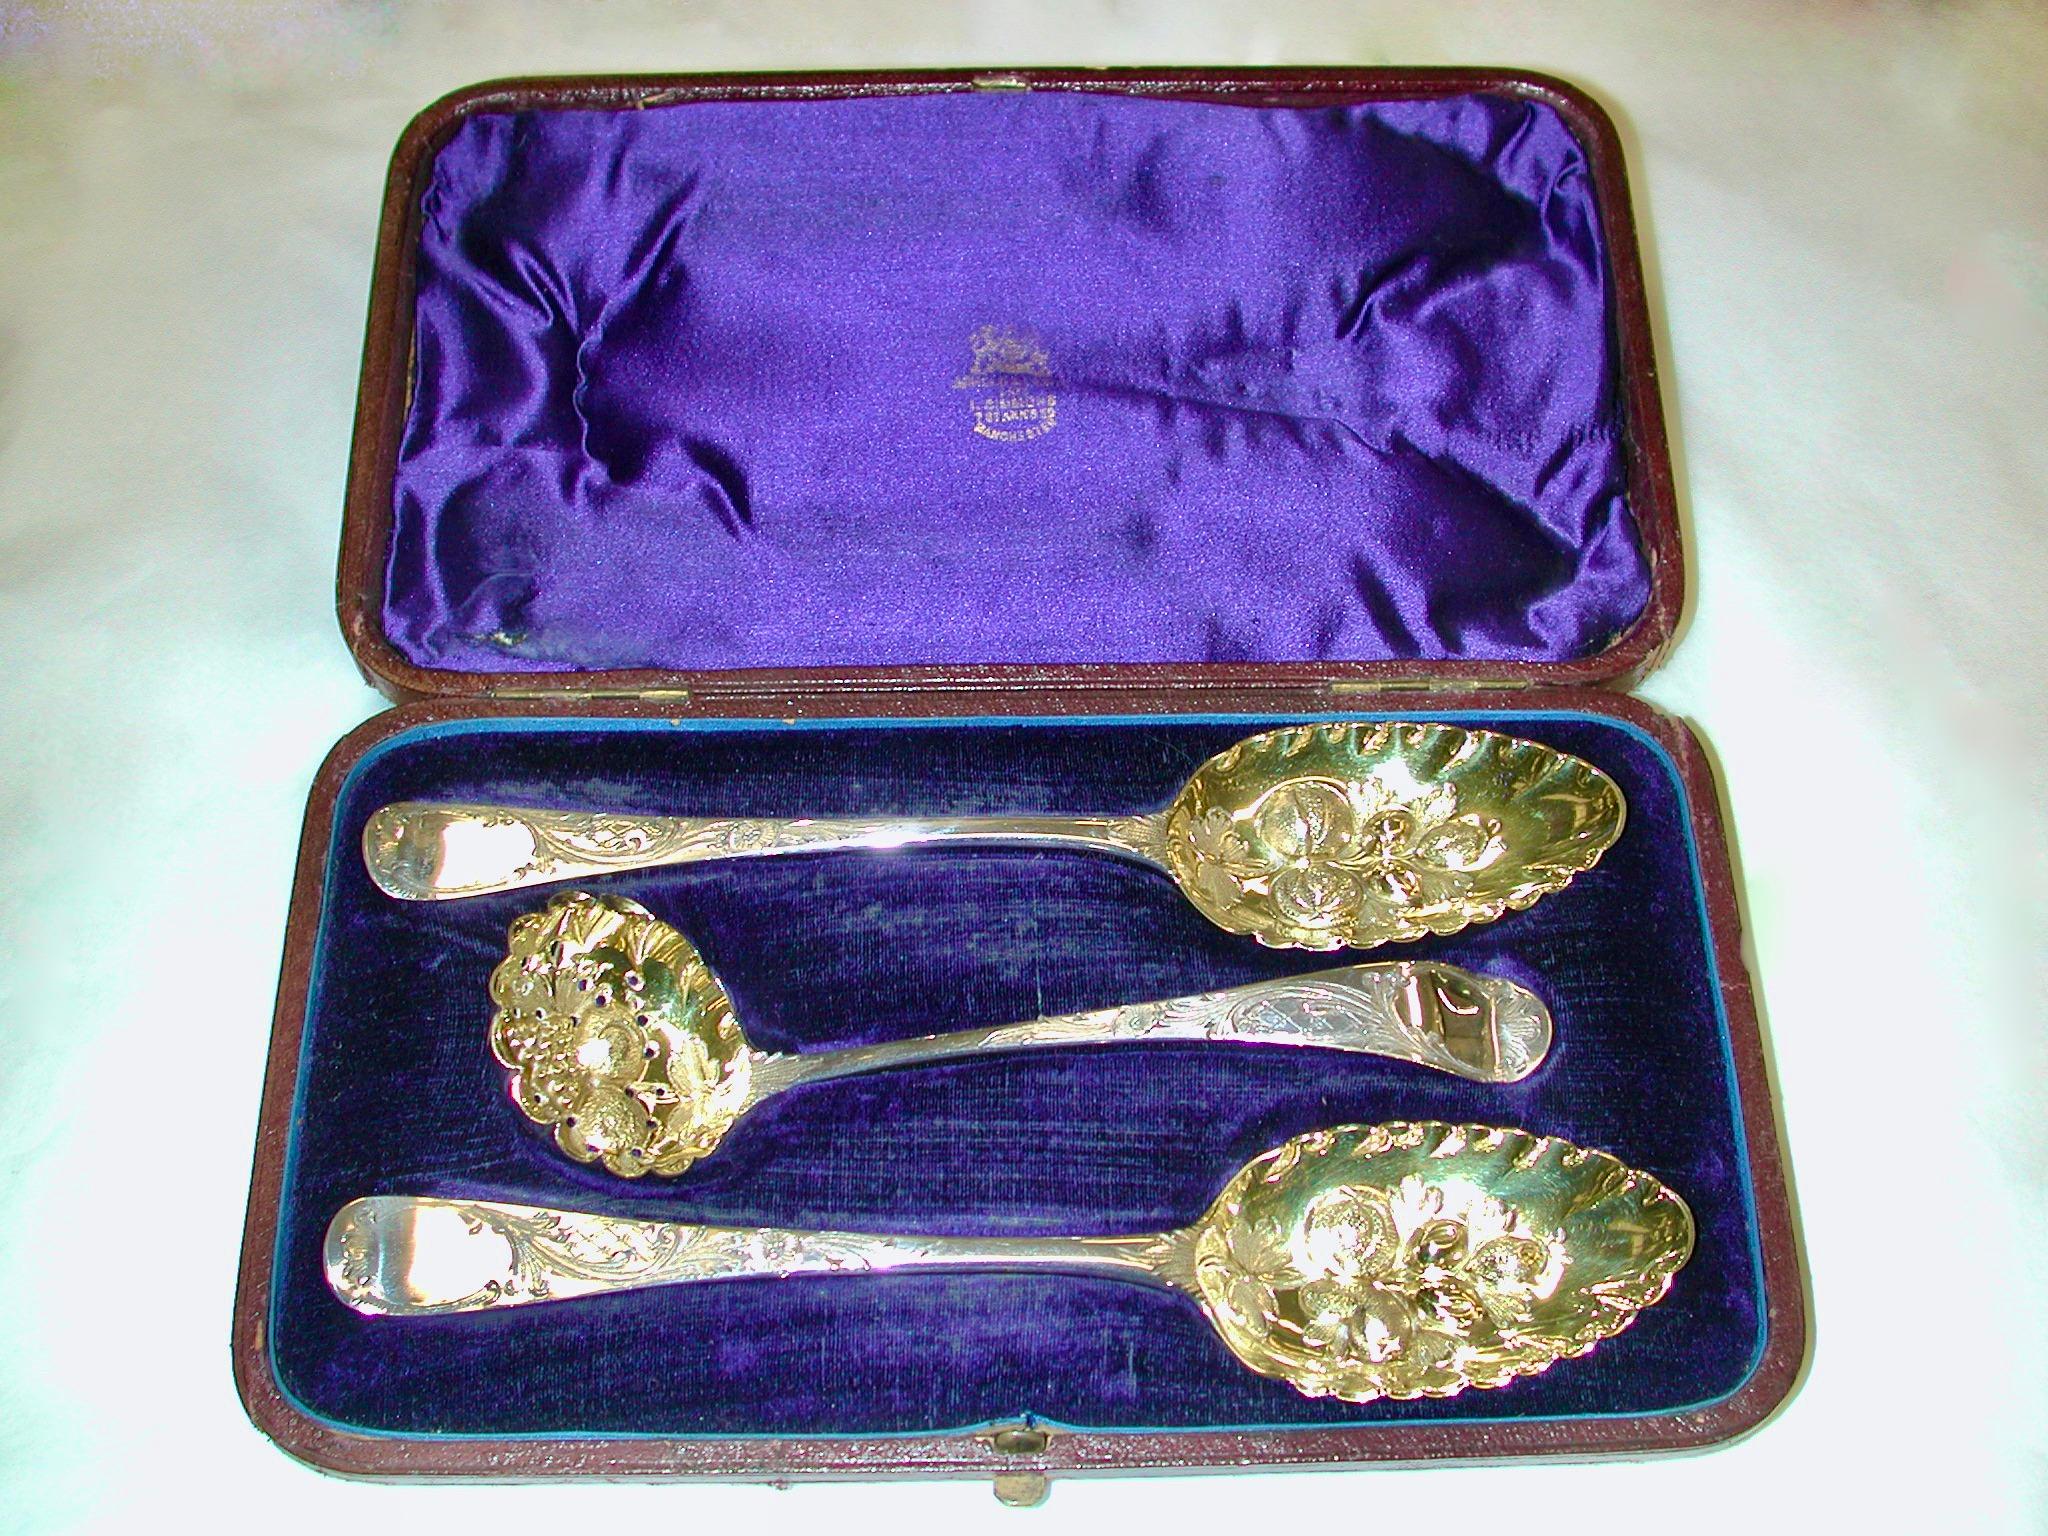 Pair of george 111 silver berry spoons with matching sugar sifter,1799-1805
Lovely fruit or dessert serving set, with wonderful fruit and leafwork chasing.